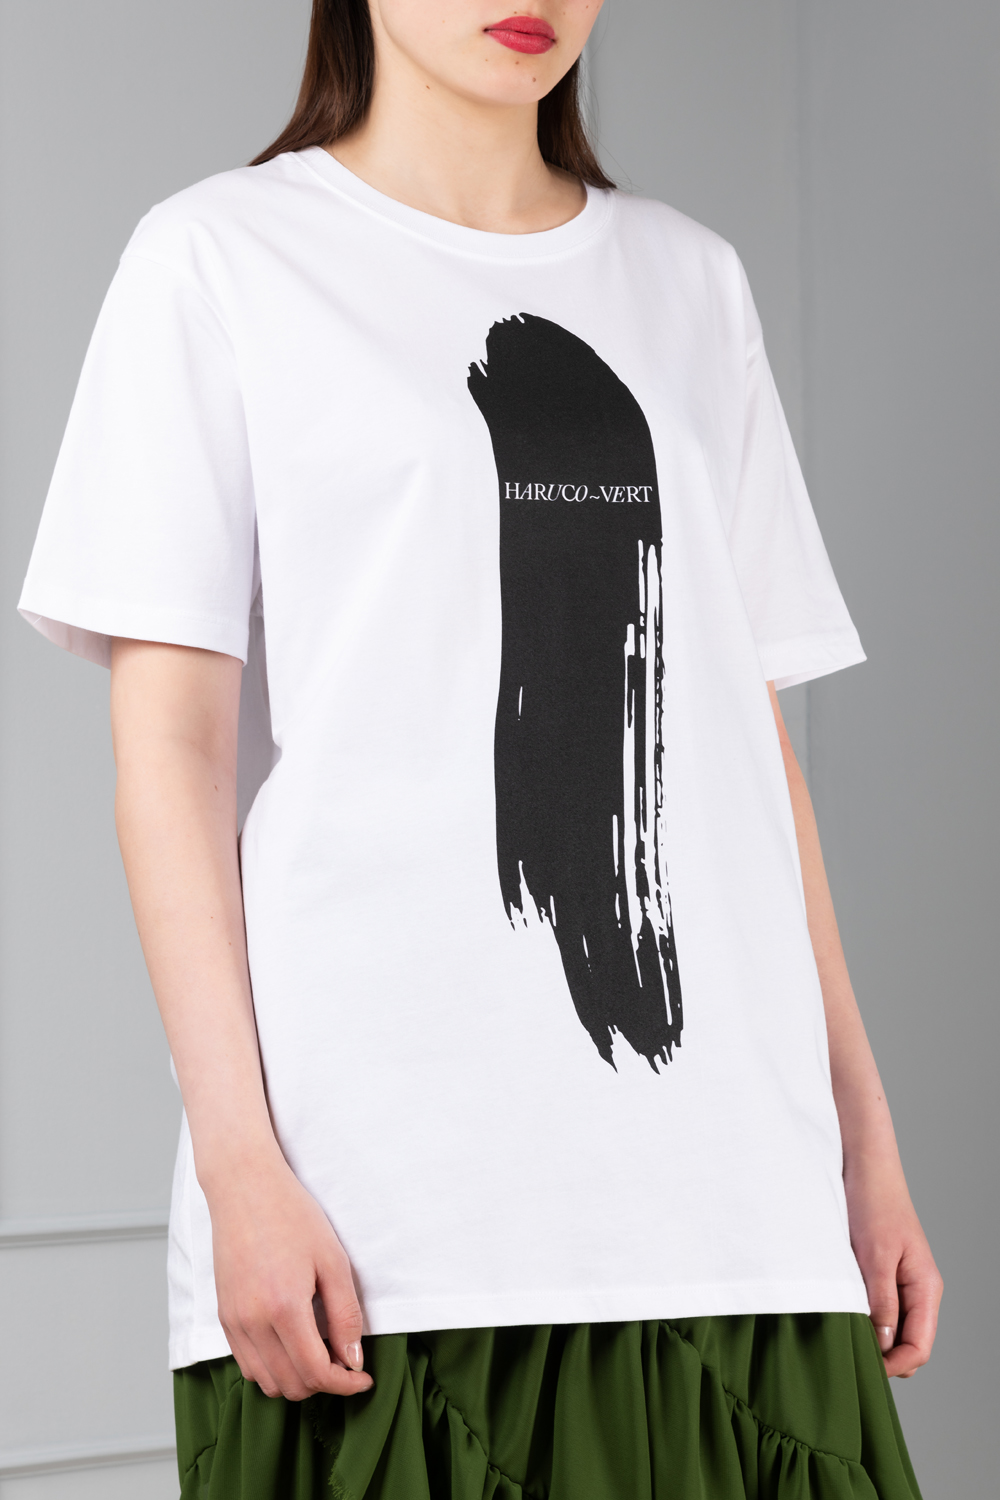 A women's white graphic-print tee with logo detail | Haruco-vert